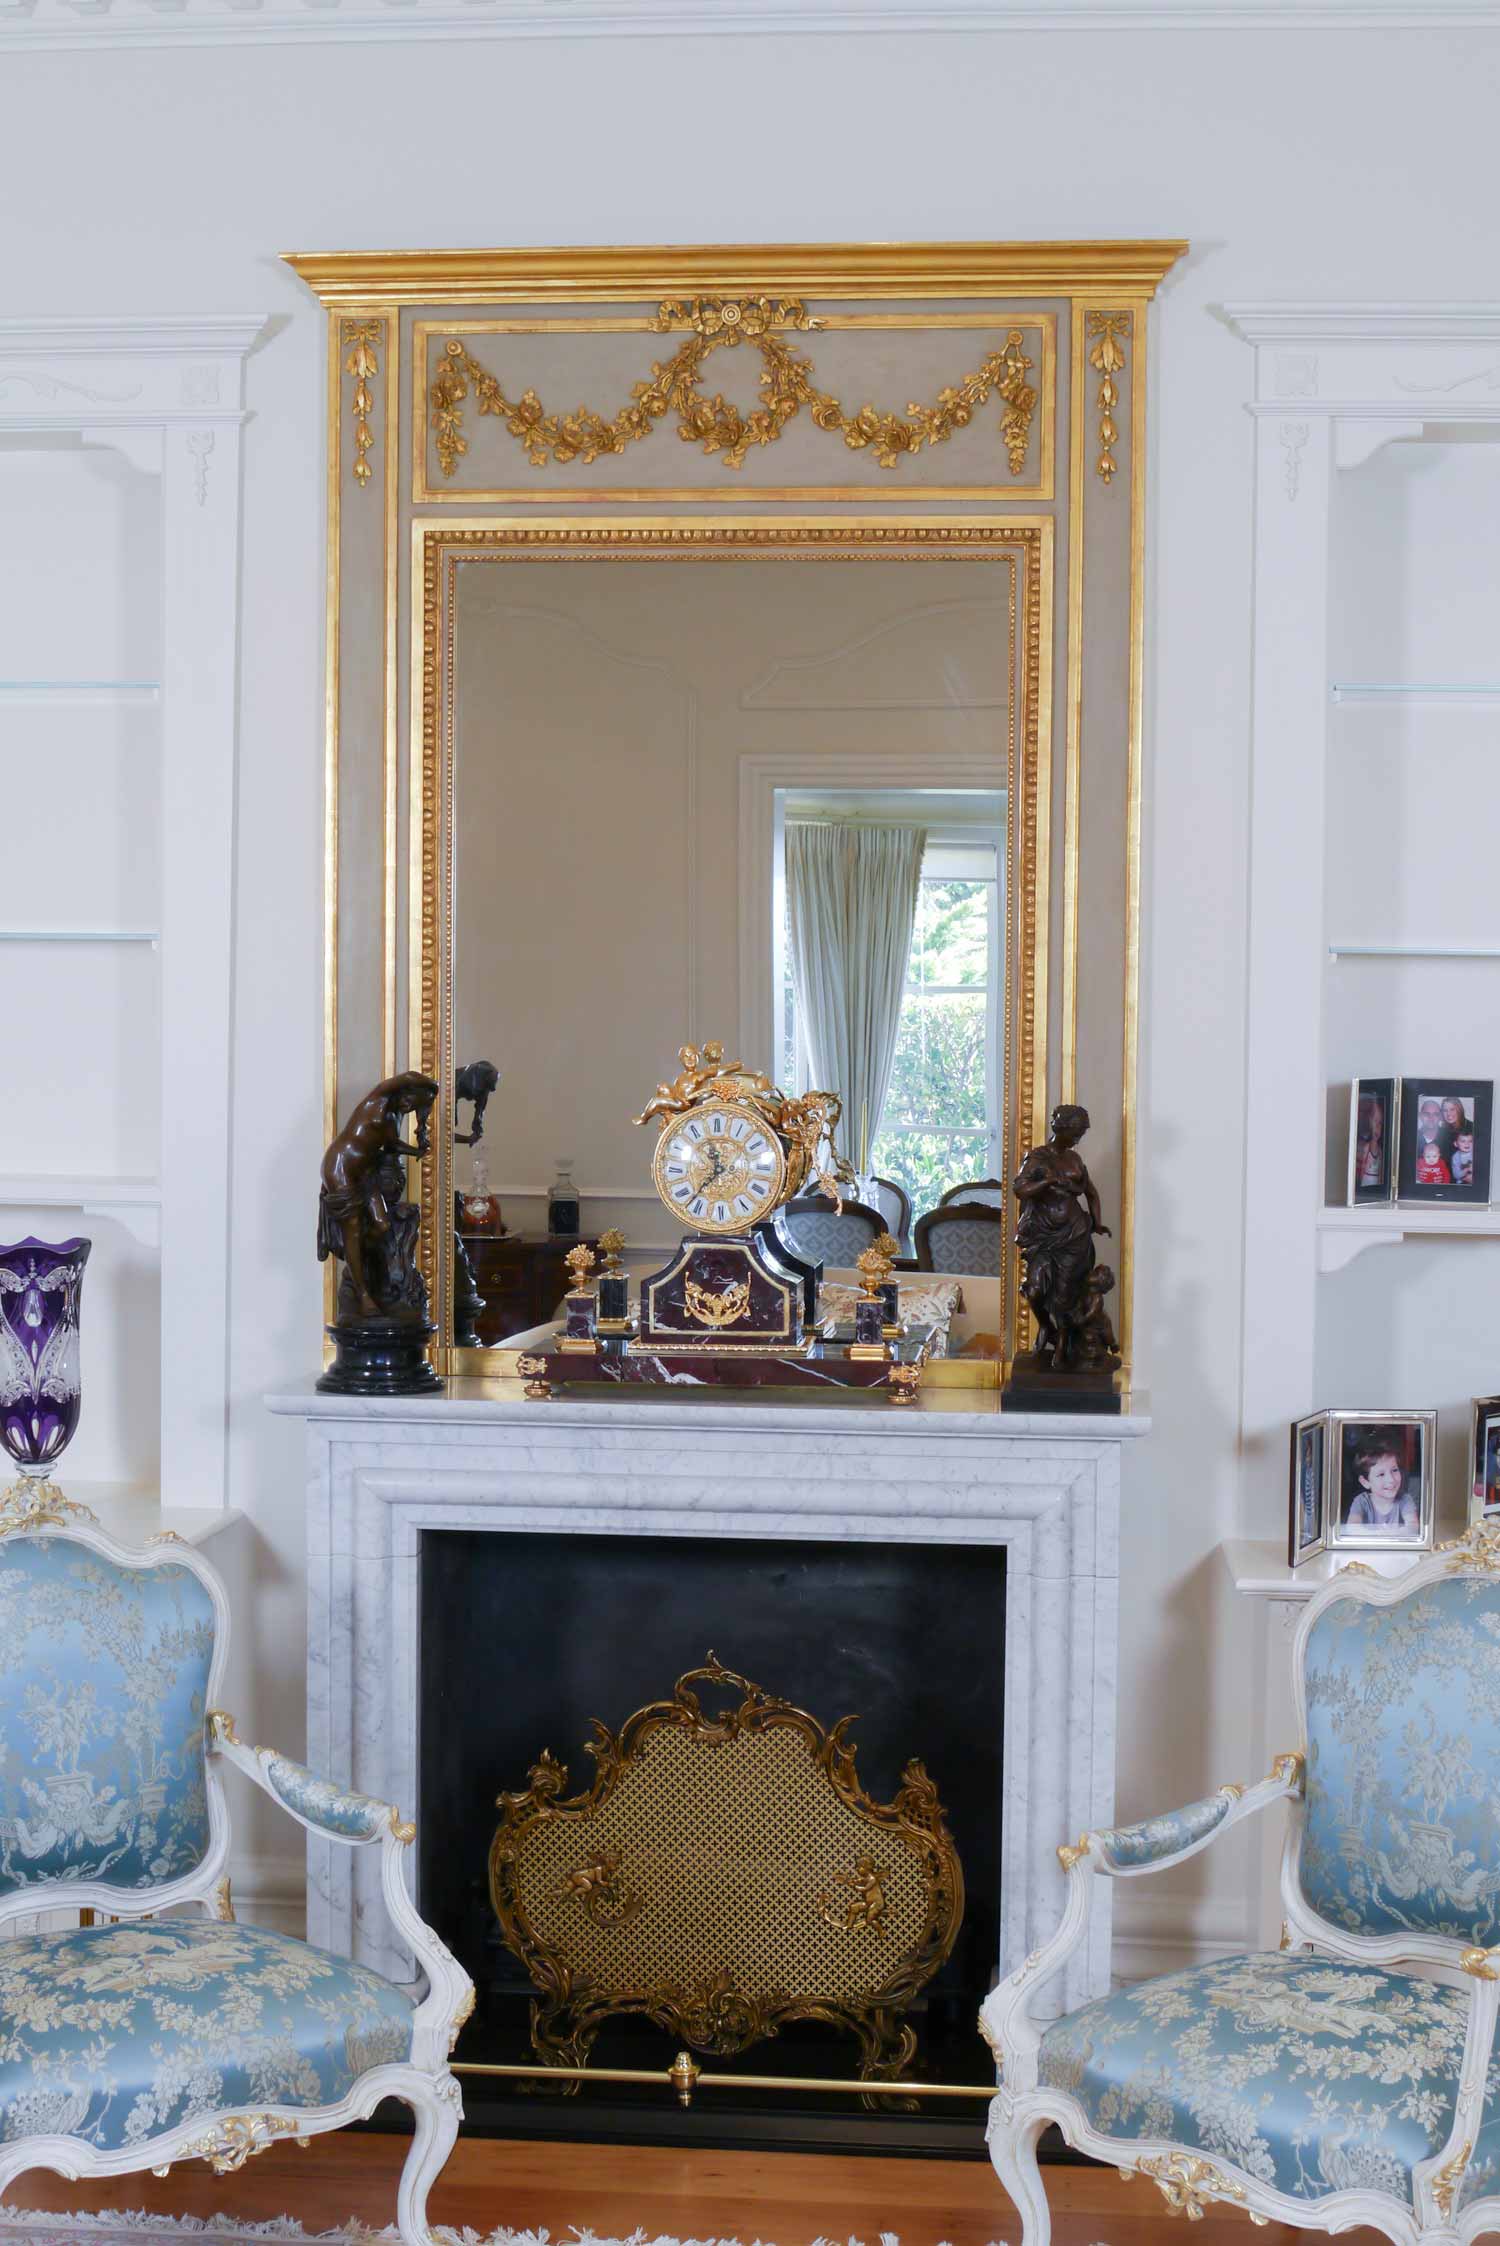 5 Lounge setting in french style interior with armchairs, mirror and décor with book case